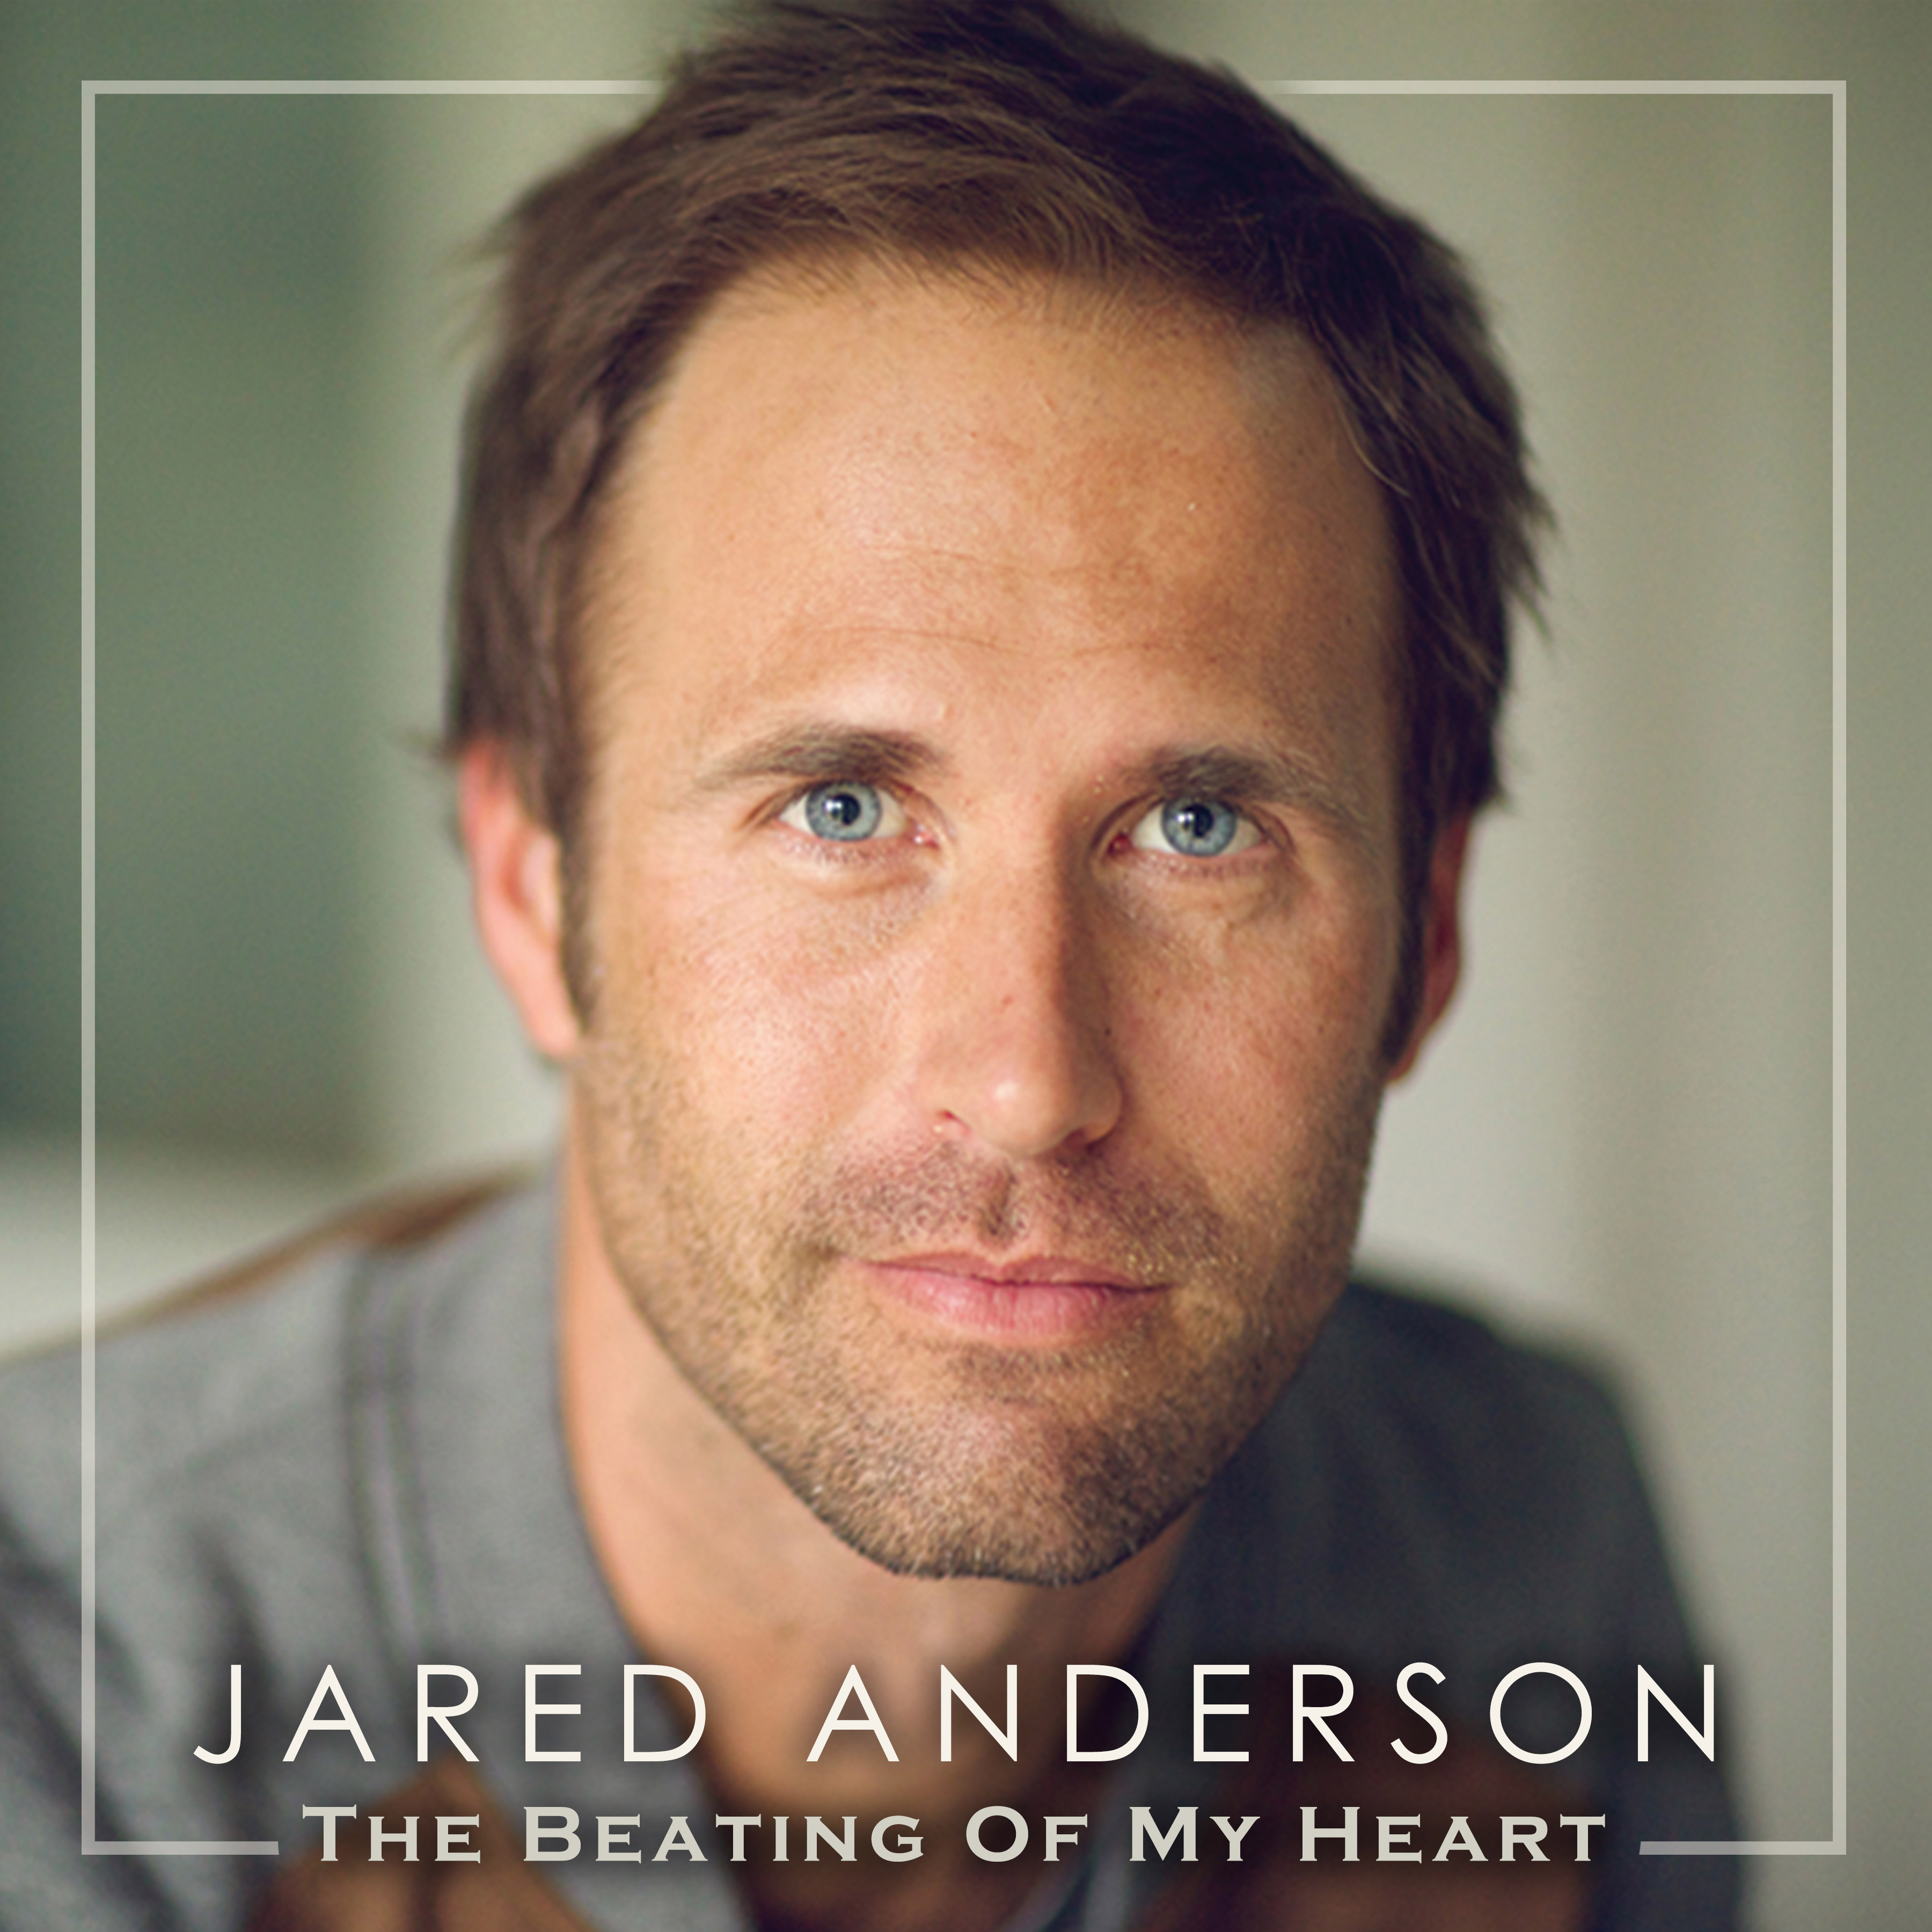 Jared Anderson - The Beating of My Heart